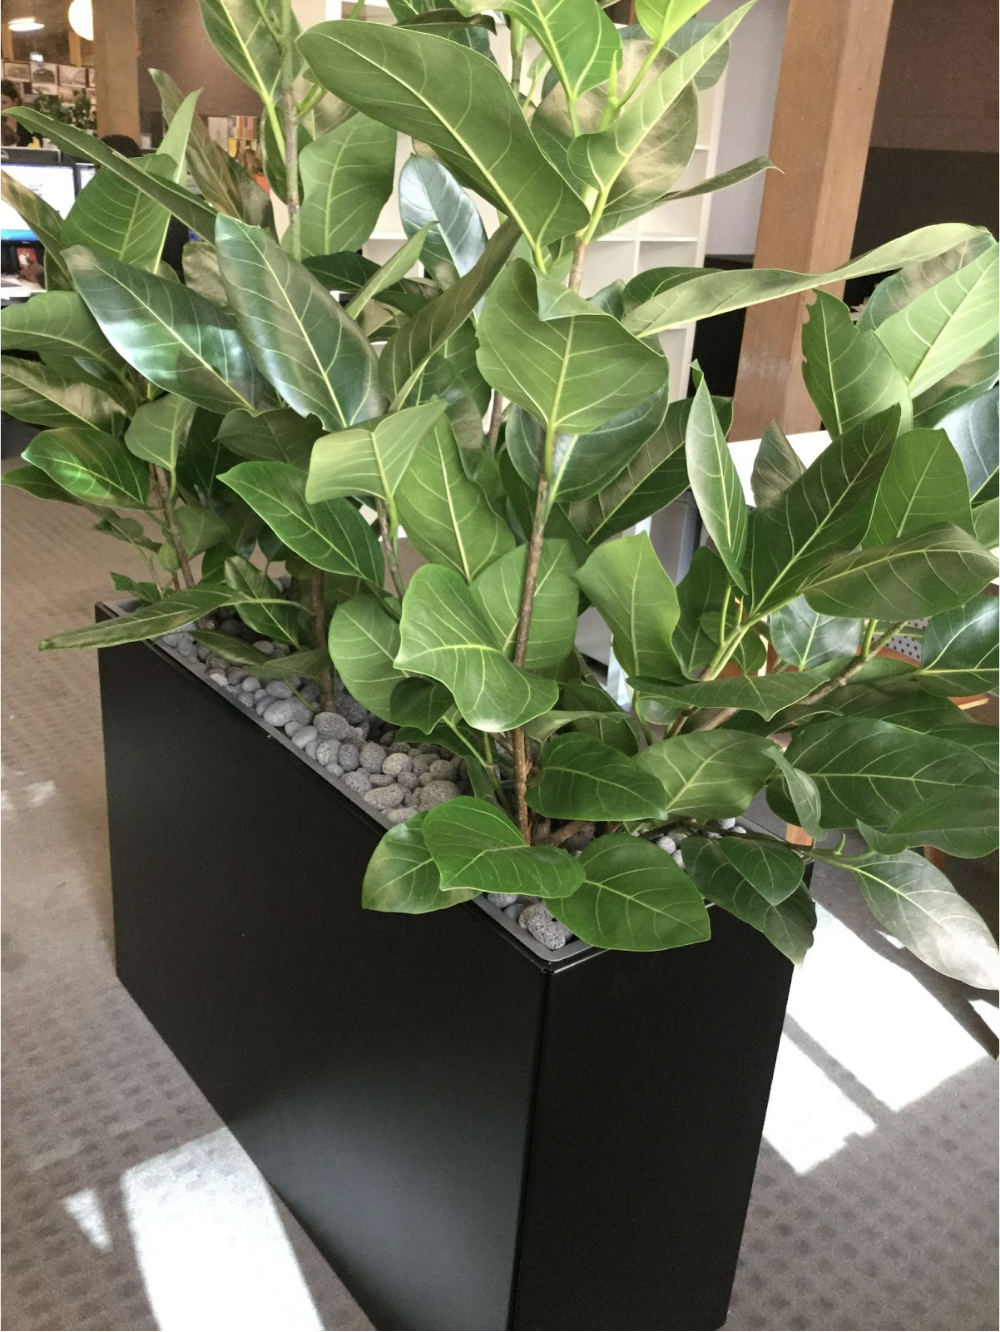 Green plants hired for office